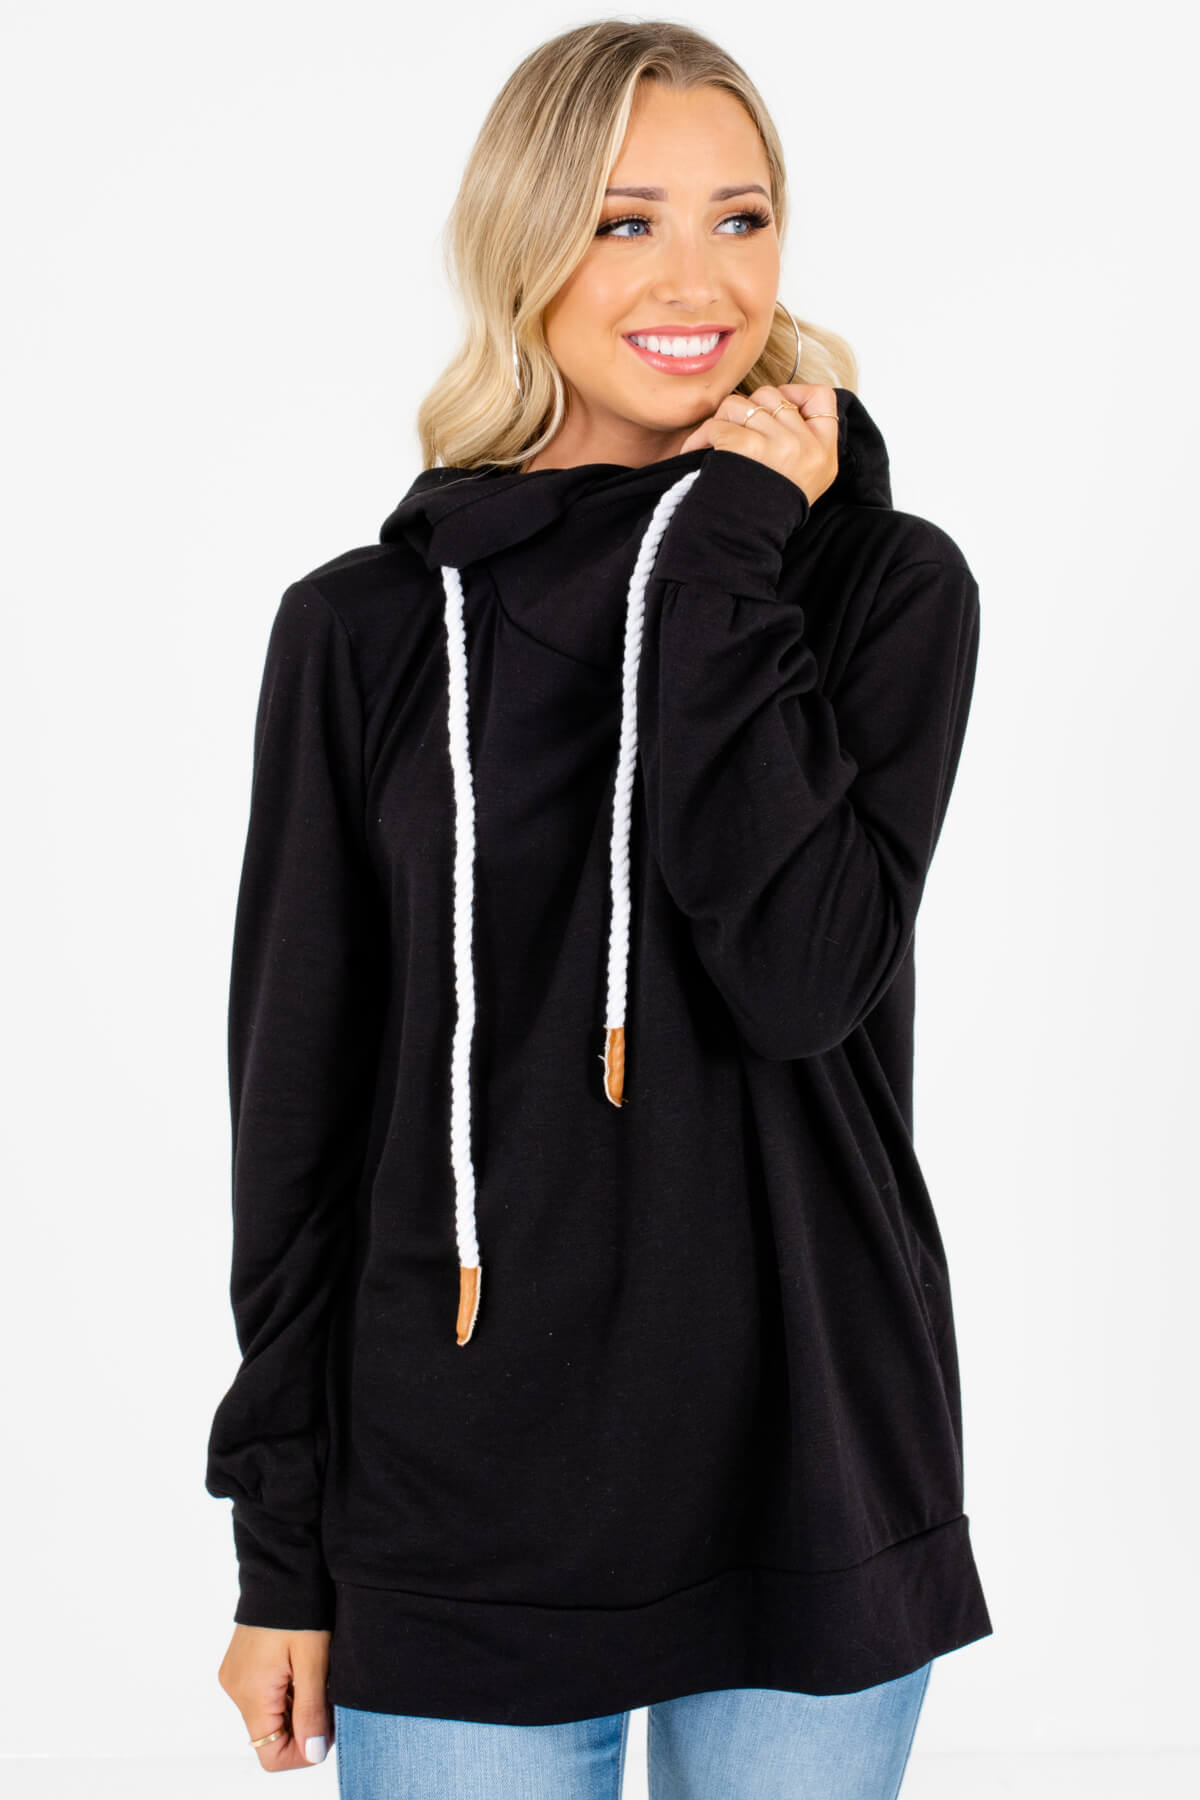 Black Soft and Stretchy Boutique Hoodies for Women